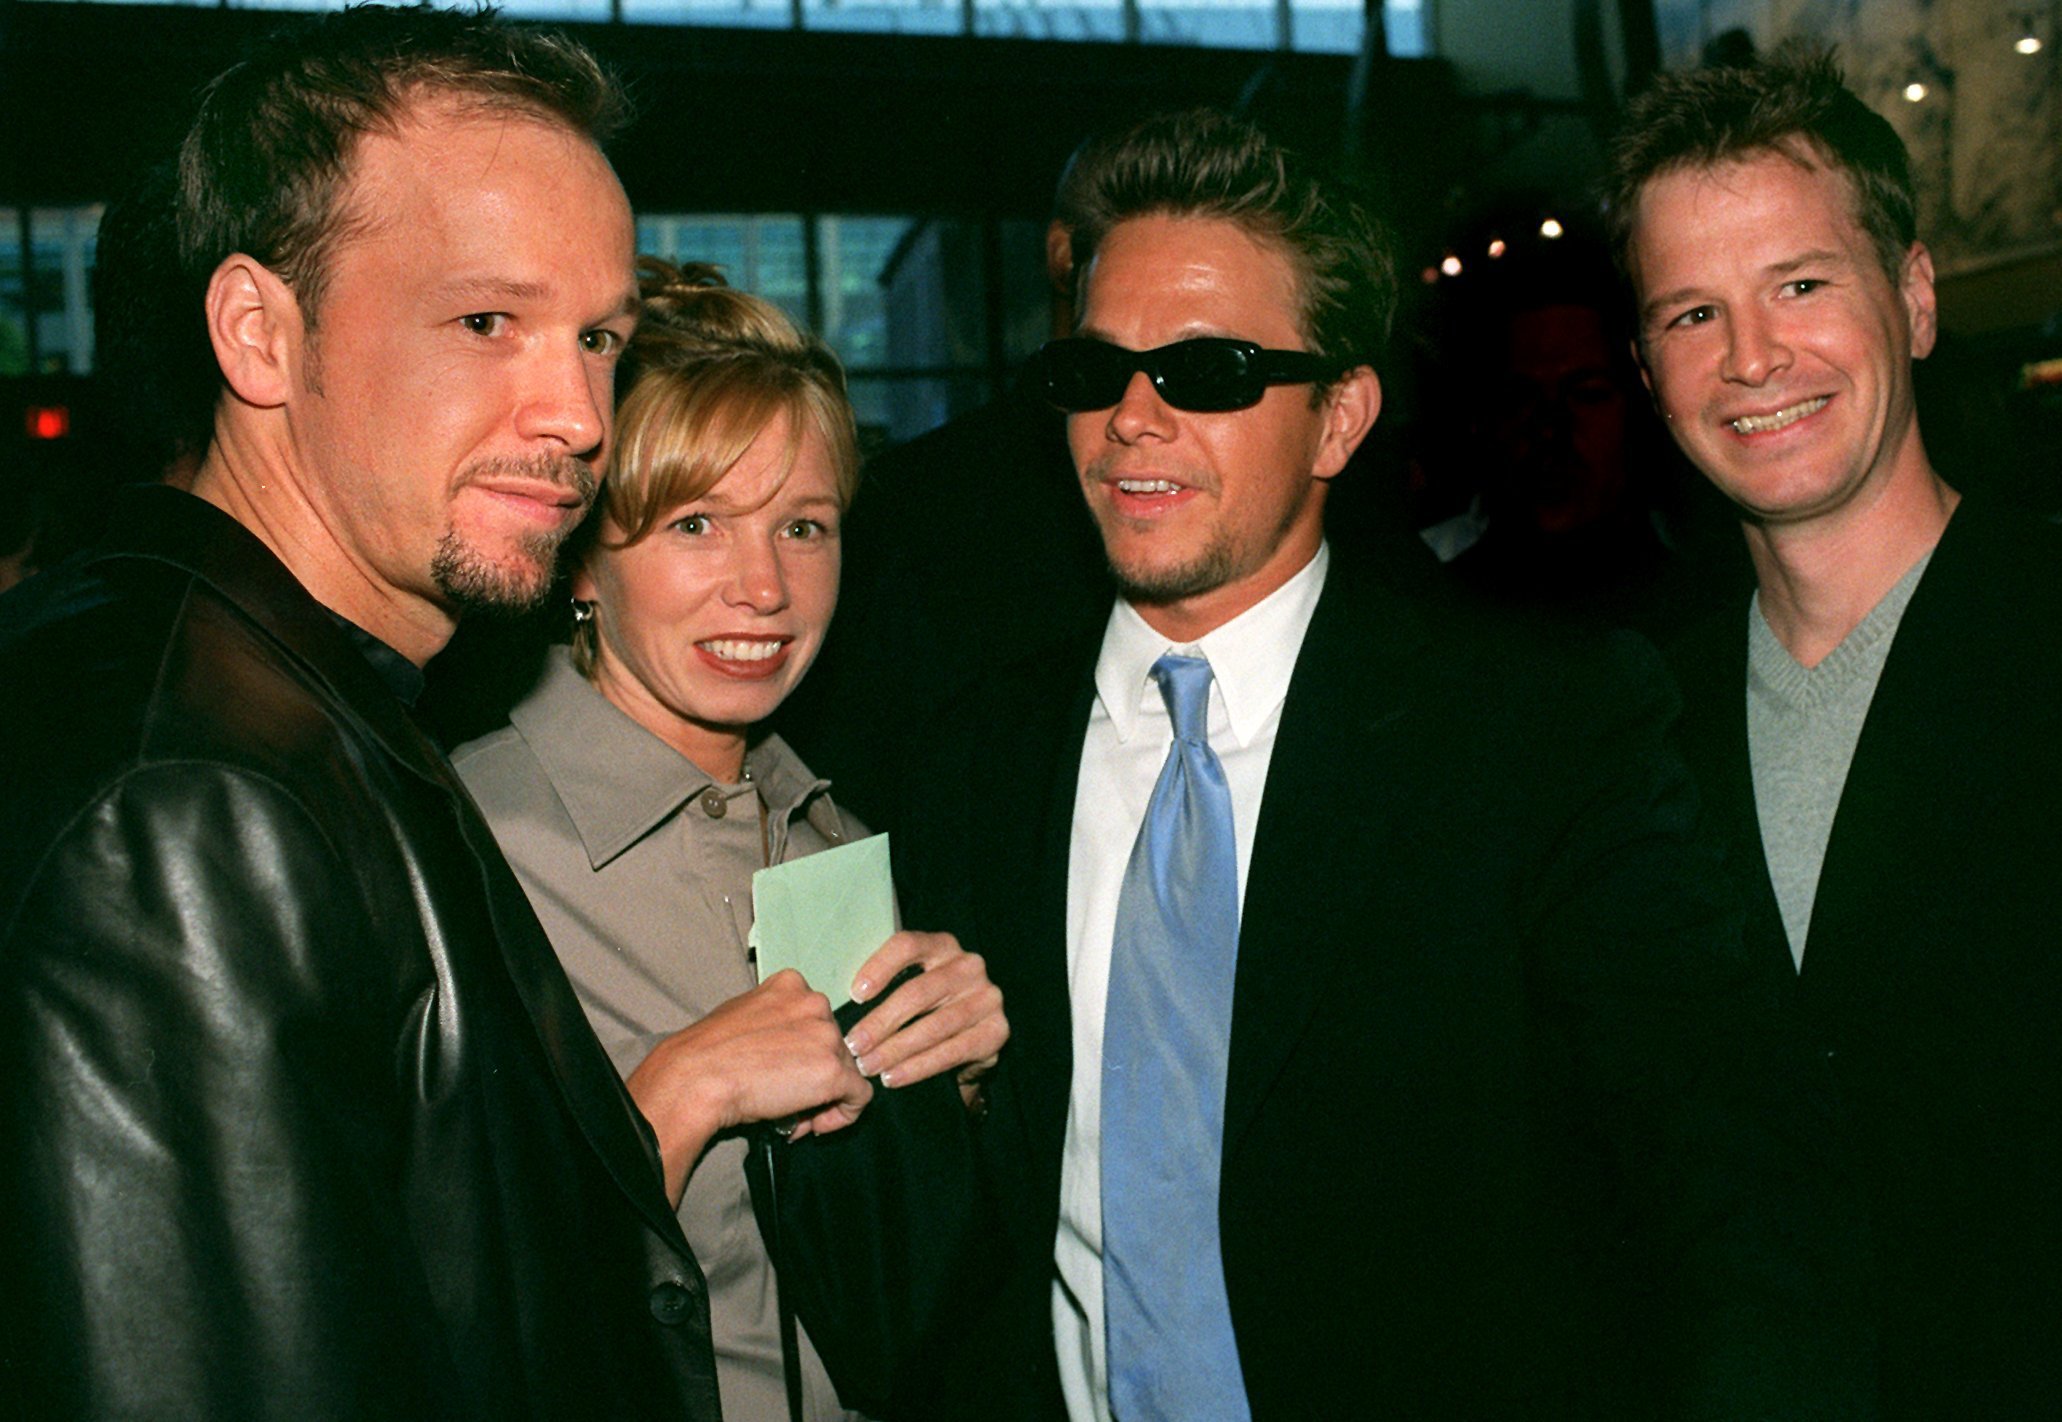 Actor Donnie Wahlberg with his sister, Tracy, and brothers actor Mark Wahlberg and Bob Wahlberg at the opening of "Southie," at the at Kendall Square Cinema. / Source: Getty Images